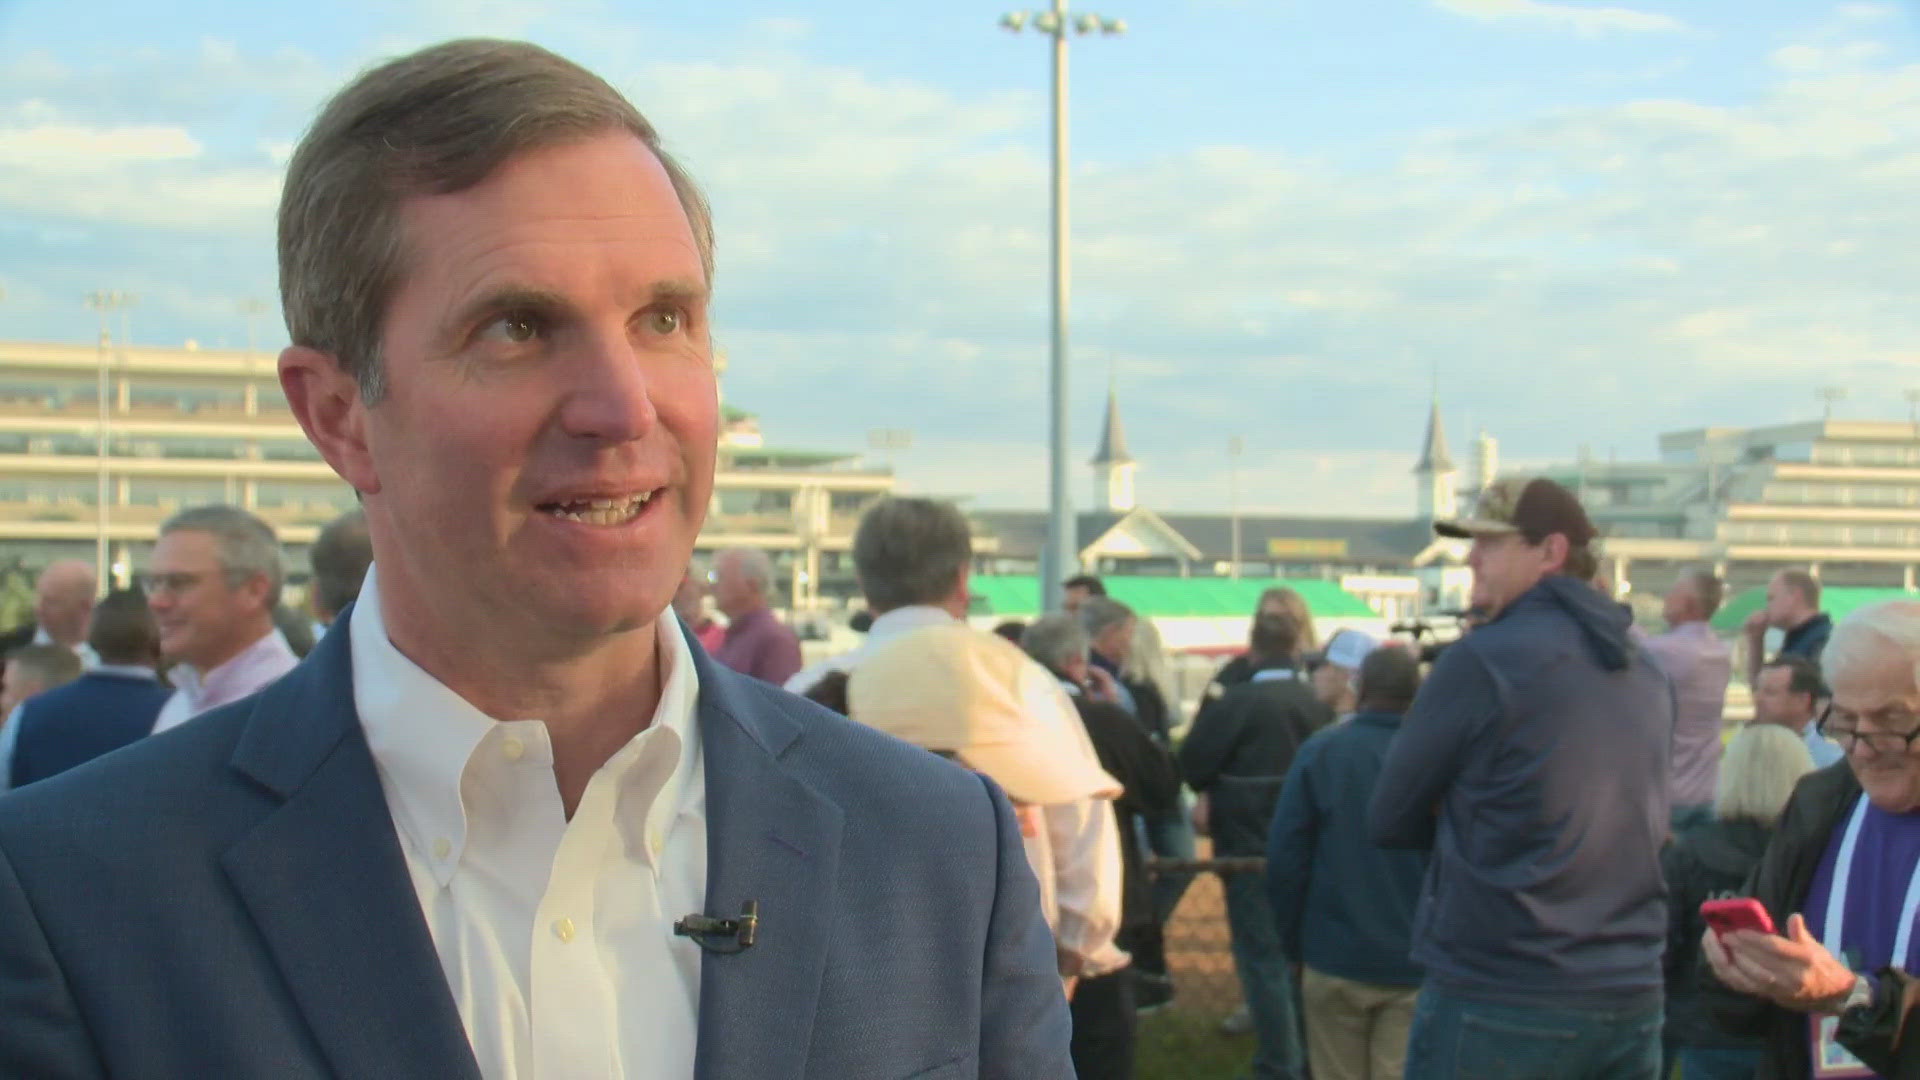 Gov. Andy Beshear is also excited for the anniversary celebration, saying it gives everyone a chance to have some fun.